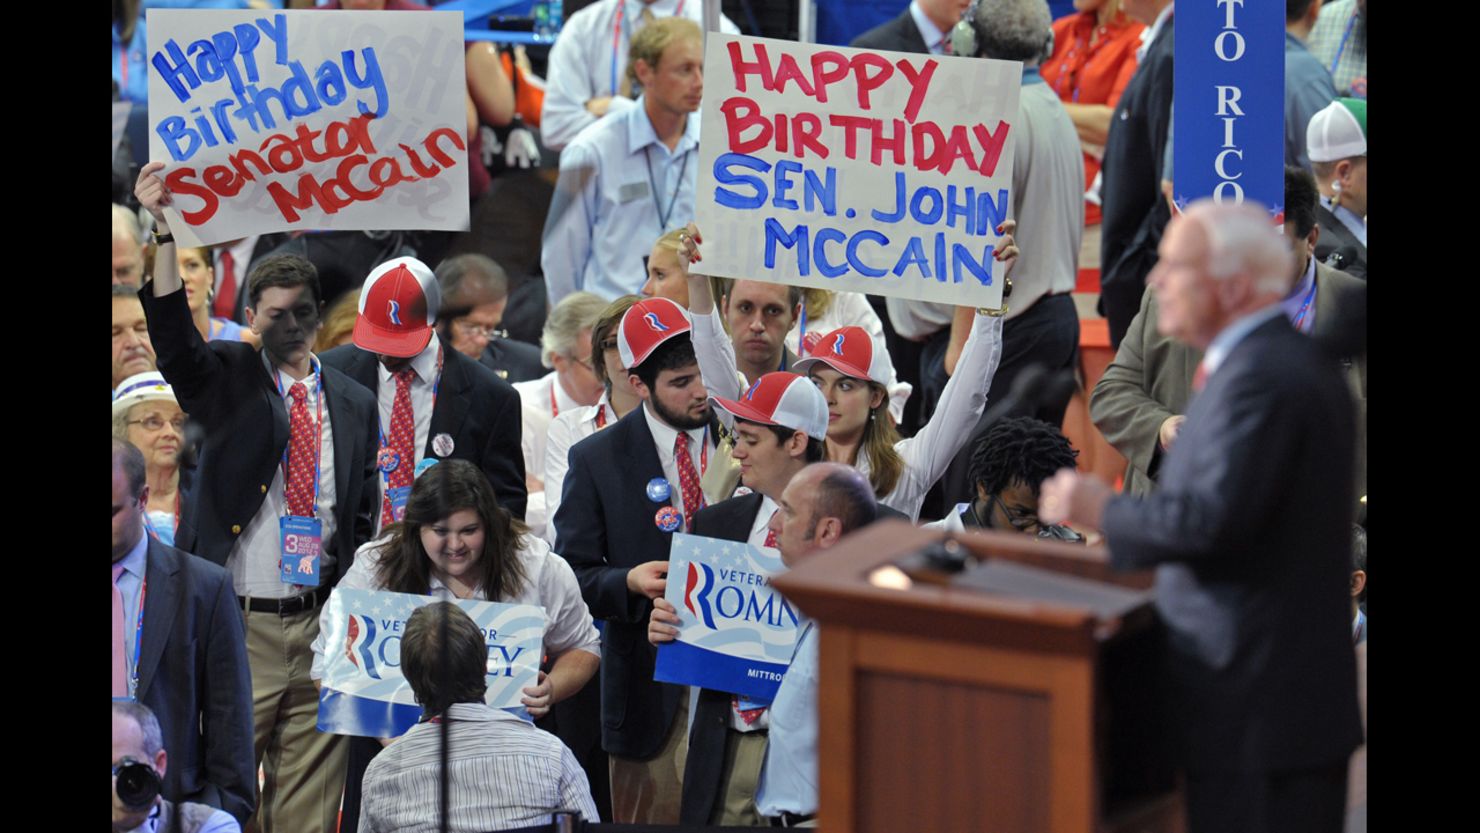 Arizona Senator John McCain speaks to the audience, some of them displaying Happy Birthday posters, during the 2012 Republican National Convention.